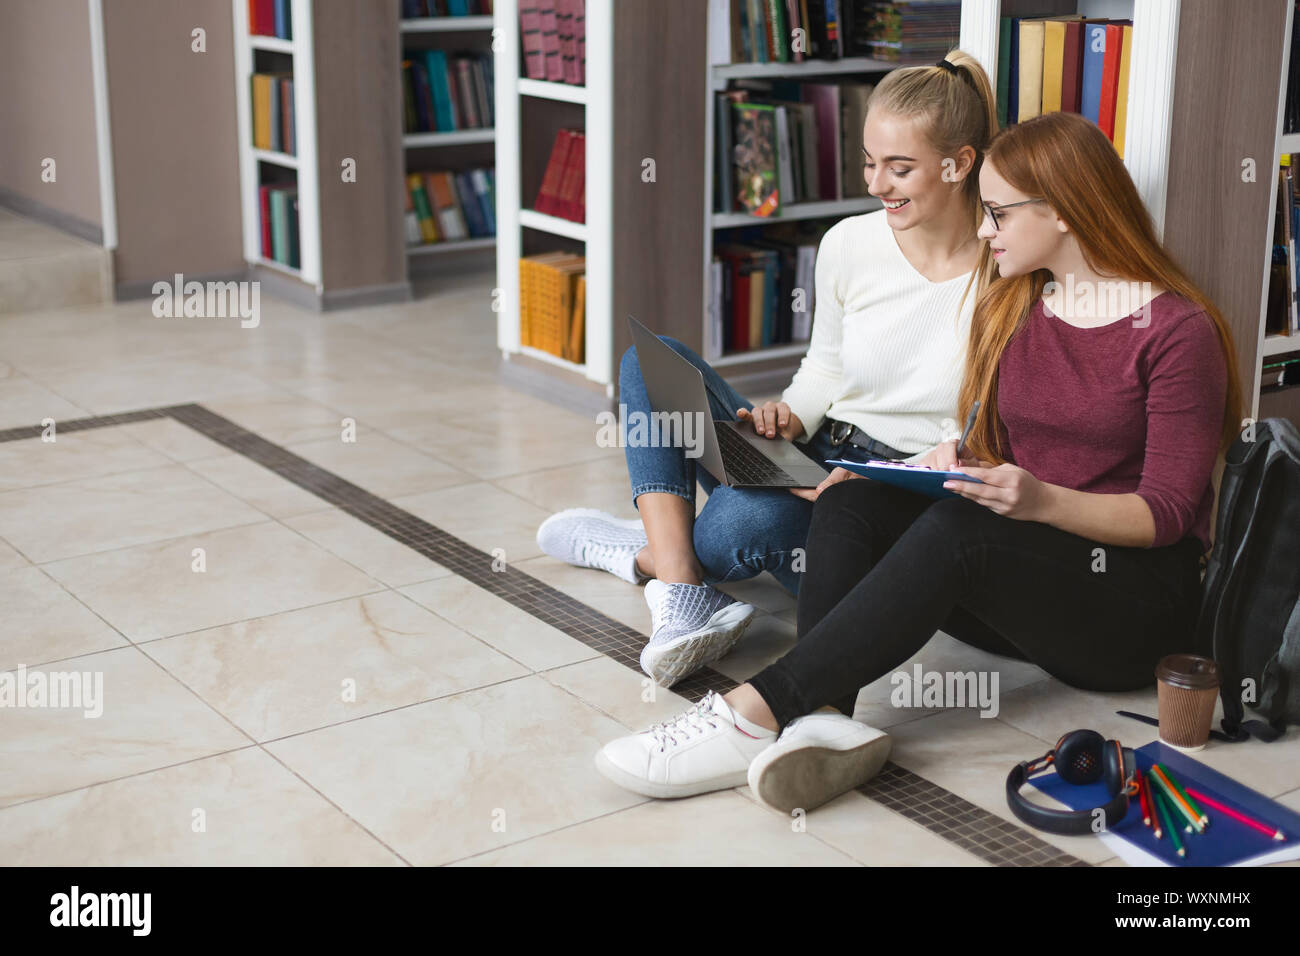 Two girlfriends sitting on floor at library, studying with laptop Stock Photo